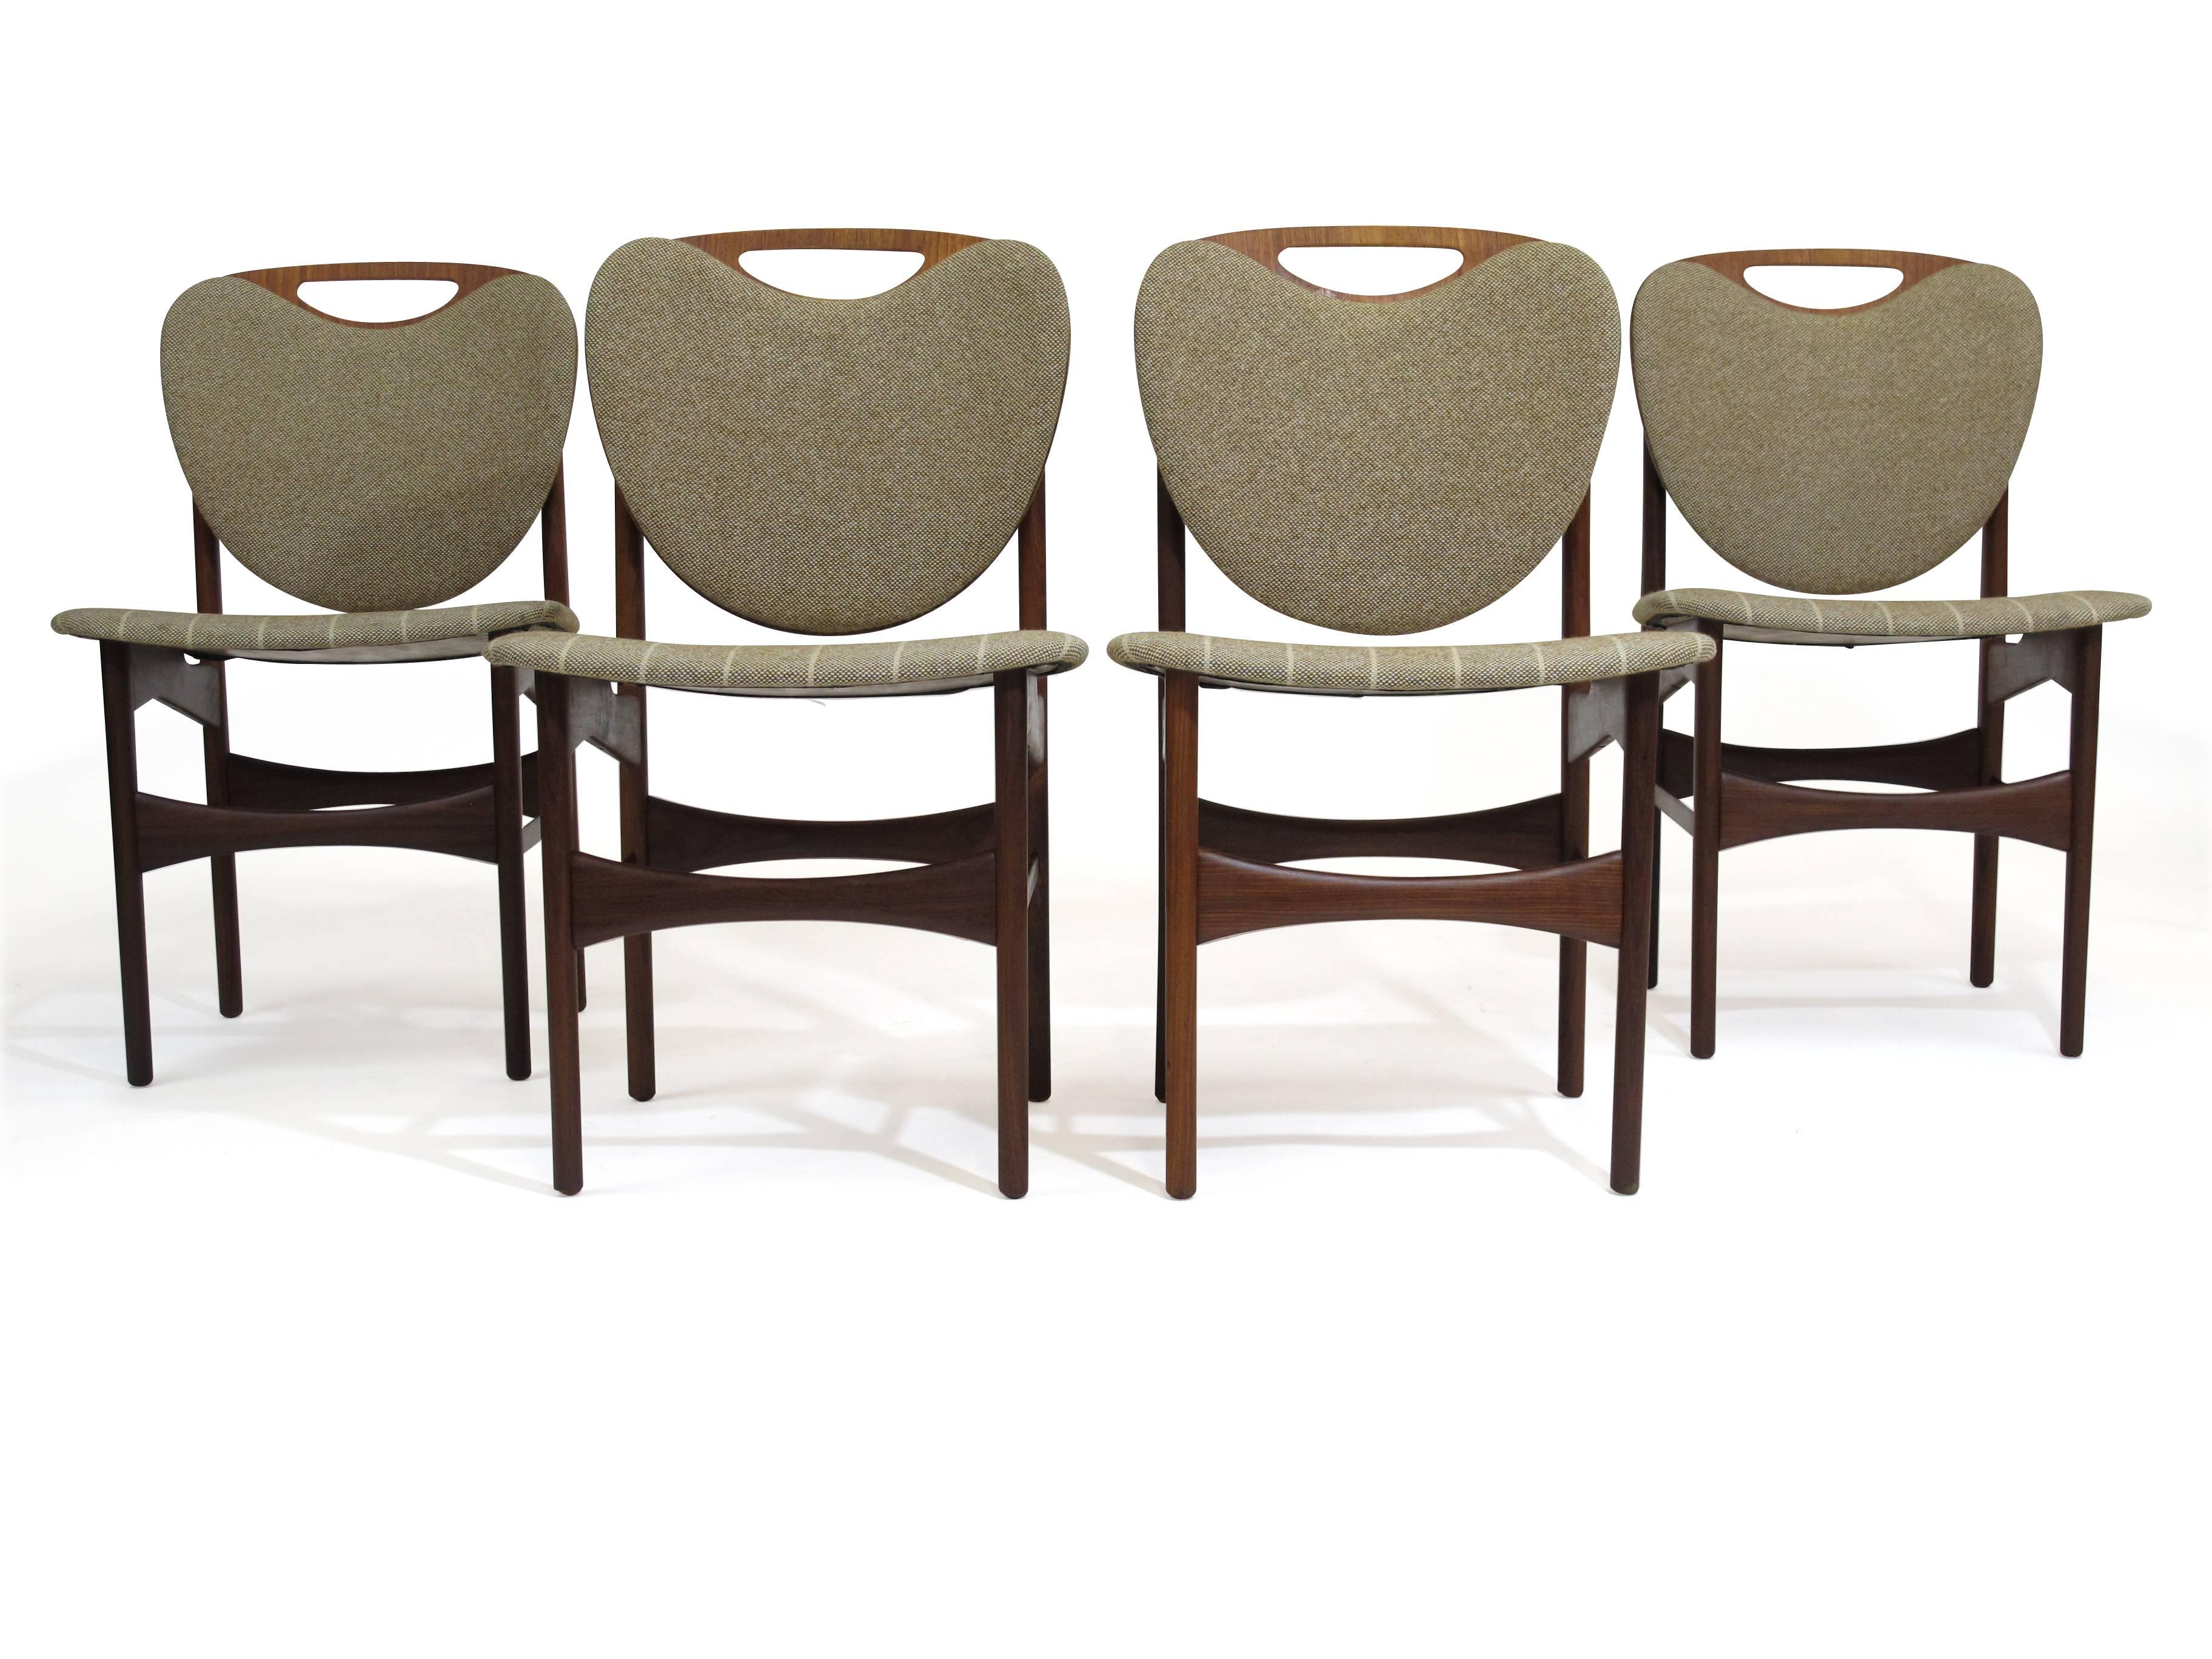 Four Danish teak dining chairs with shield shaped back in original vintage fabric. 
Custom upholstery available upon request.